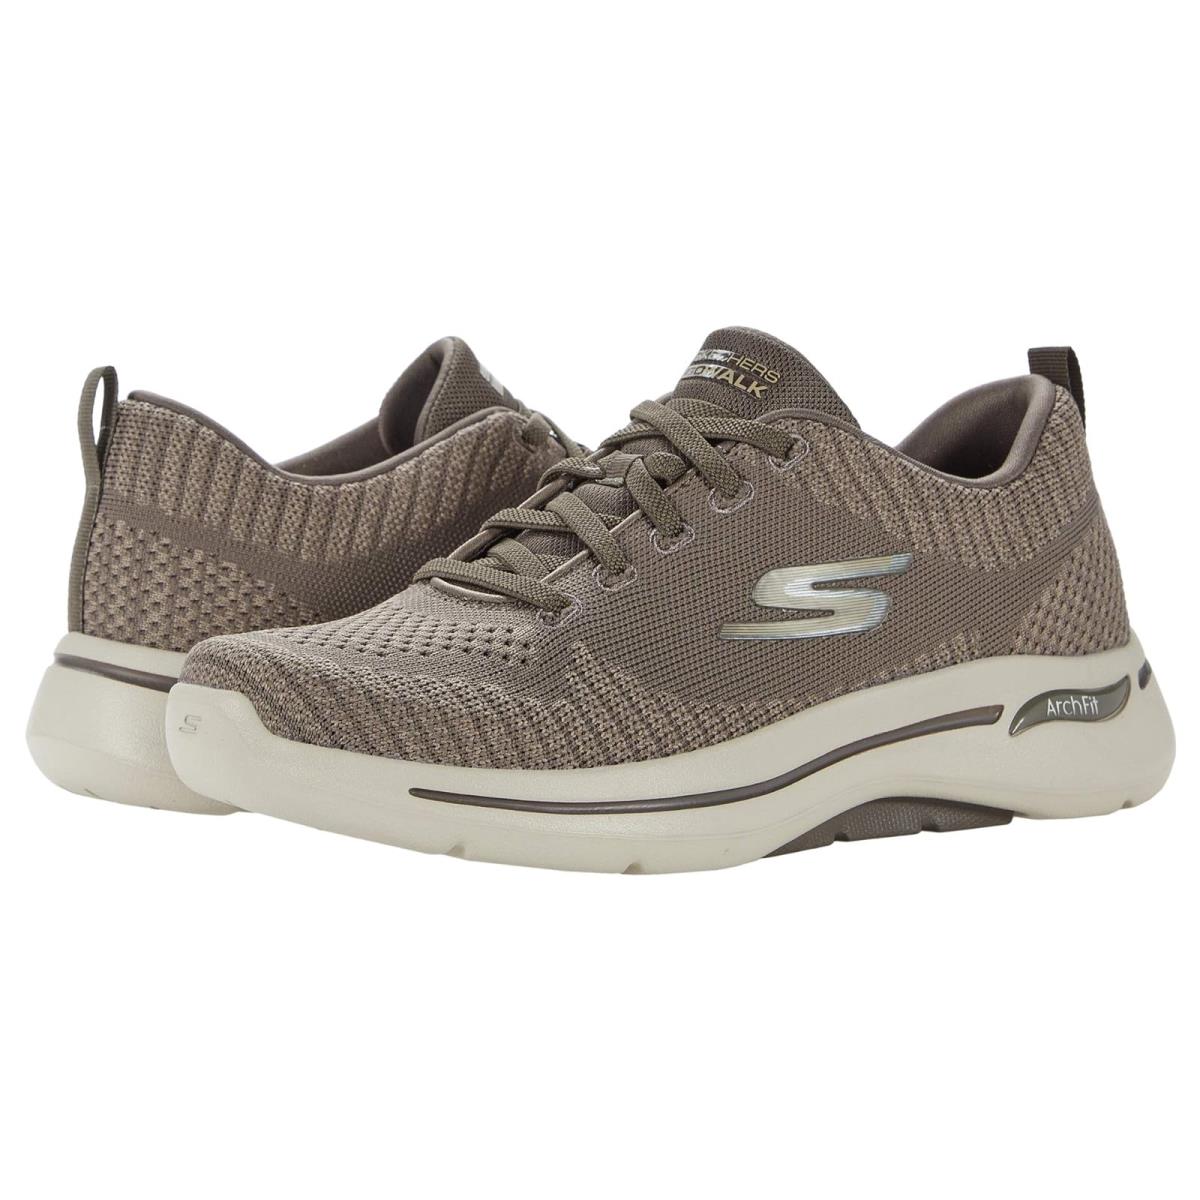 Man`s Shoes Skechers Performance Go Walk Arch Fit - 216126 Taupe